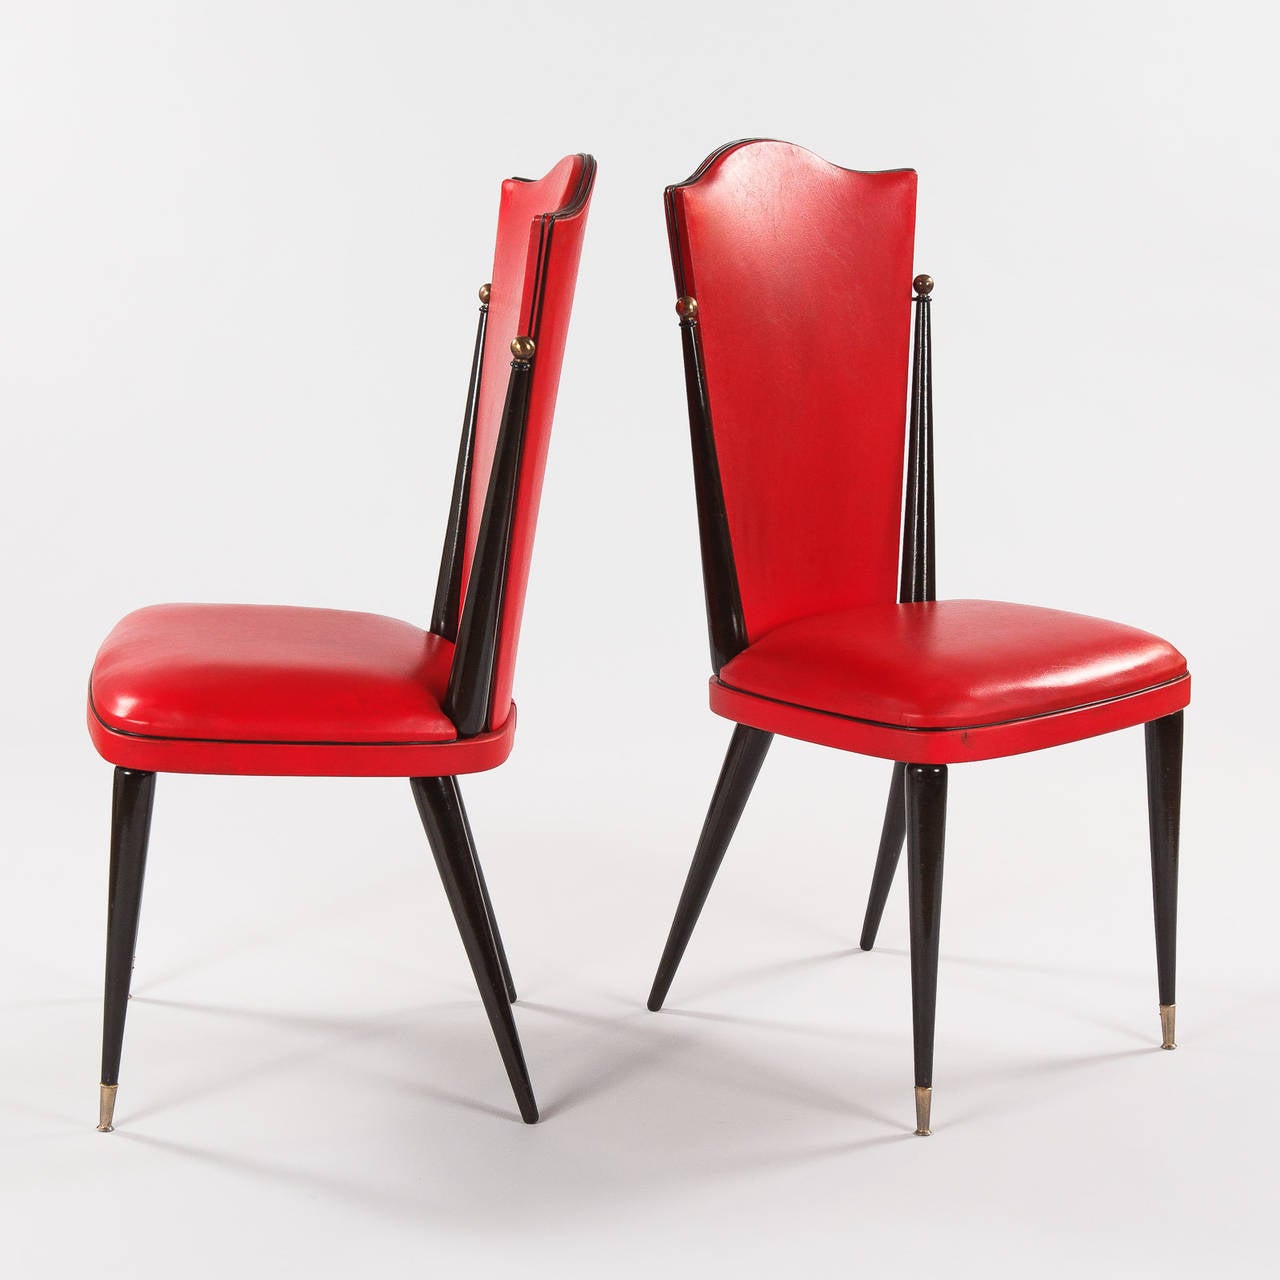 A pair of great looking vintage French chairs, circa 1960s, in red vinyl with a black lacquered wood frame. The chairs have a tall arched top back and the feet are finished with a brass sabot. From floor to seat: 18.50